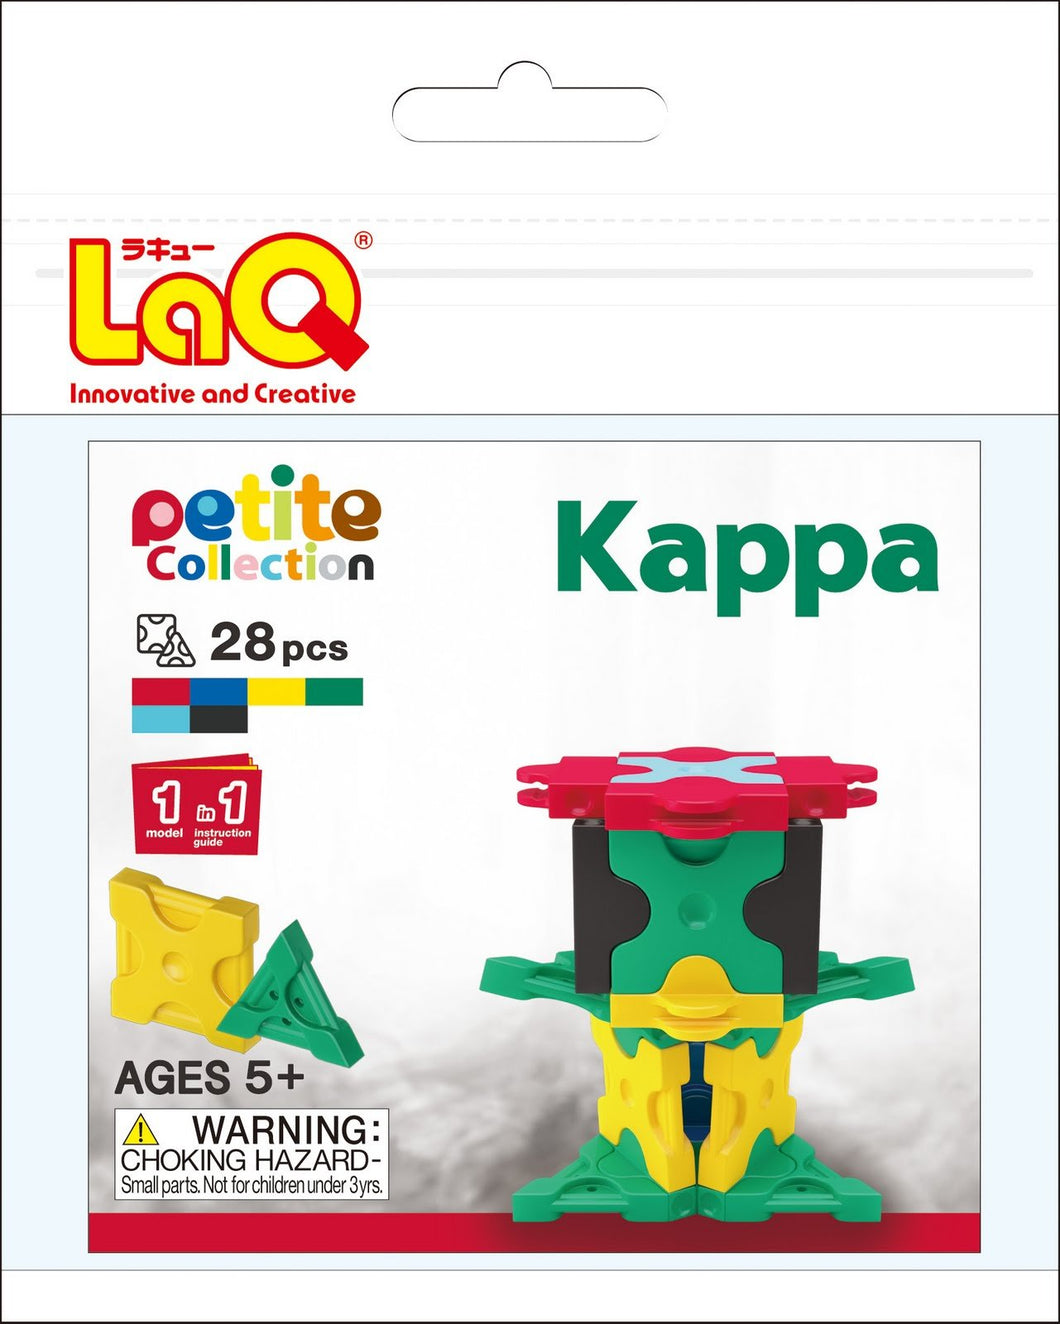 Kappa set package featured in the LaQ petite set